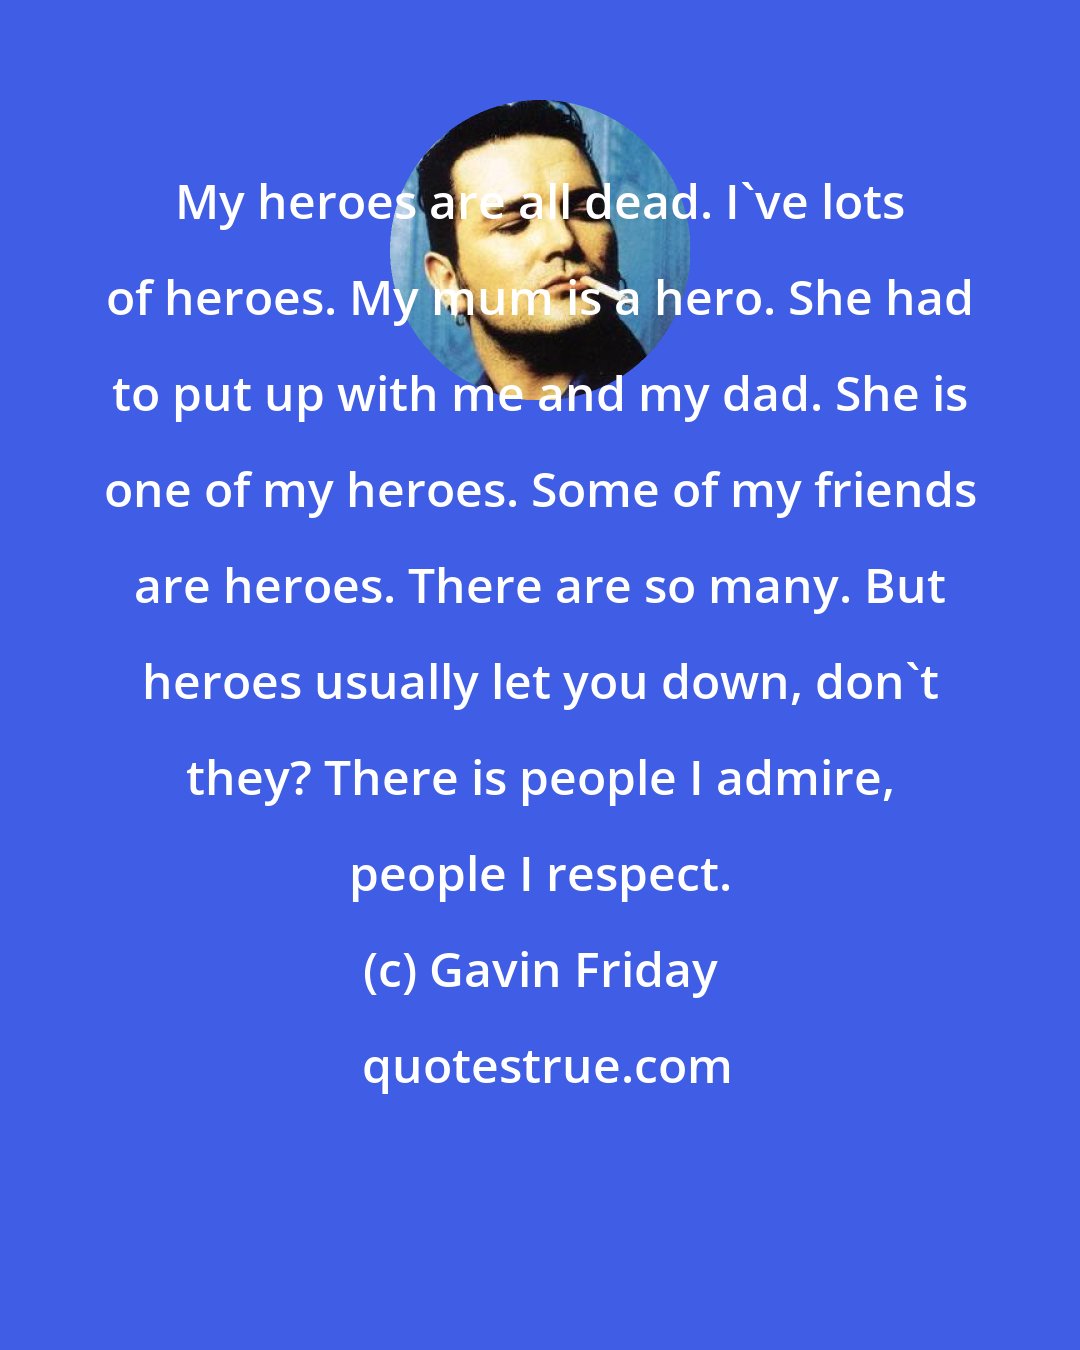 Gavin Friday: My heroes are all dead. I've lots of heroes. My mum is a hero. She had to put up with me and my dad. She is one of my heroes. Some of my friends are heroes. There are so many. But heroes usually let you down, don't they? There is people I admire, people I respect.